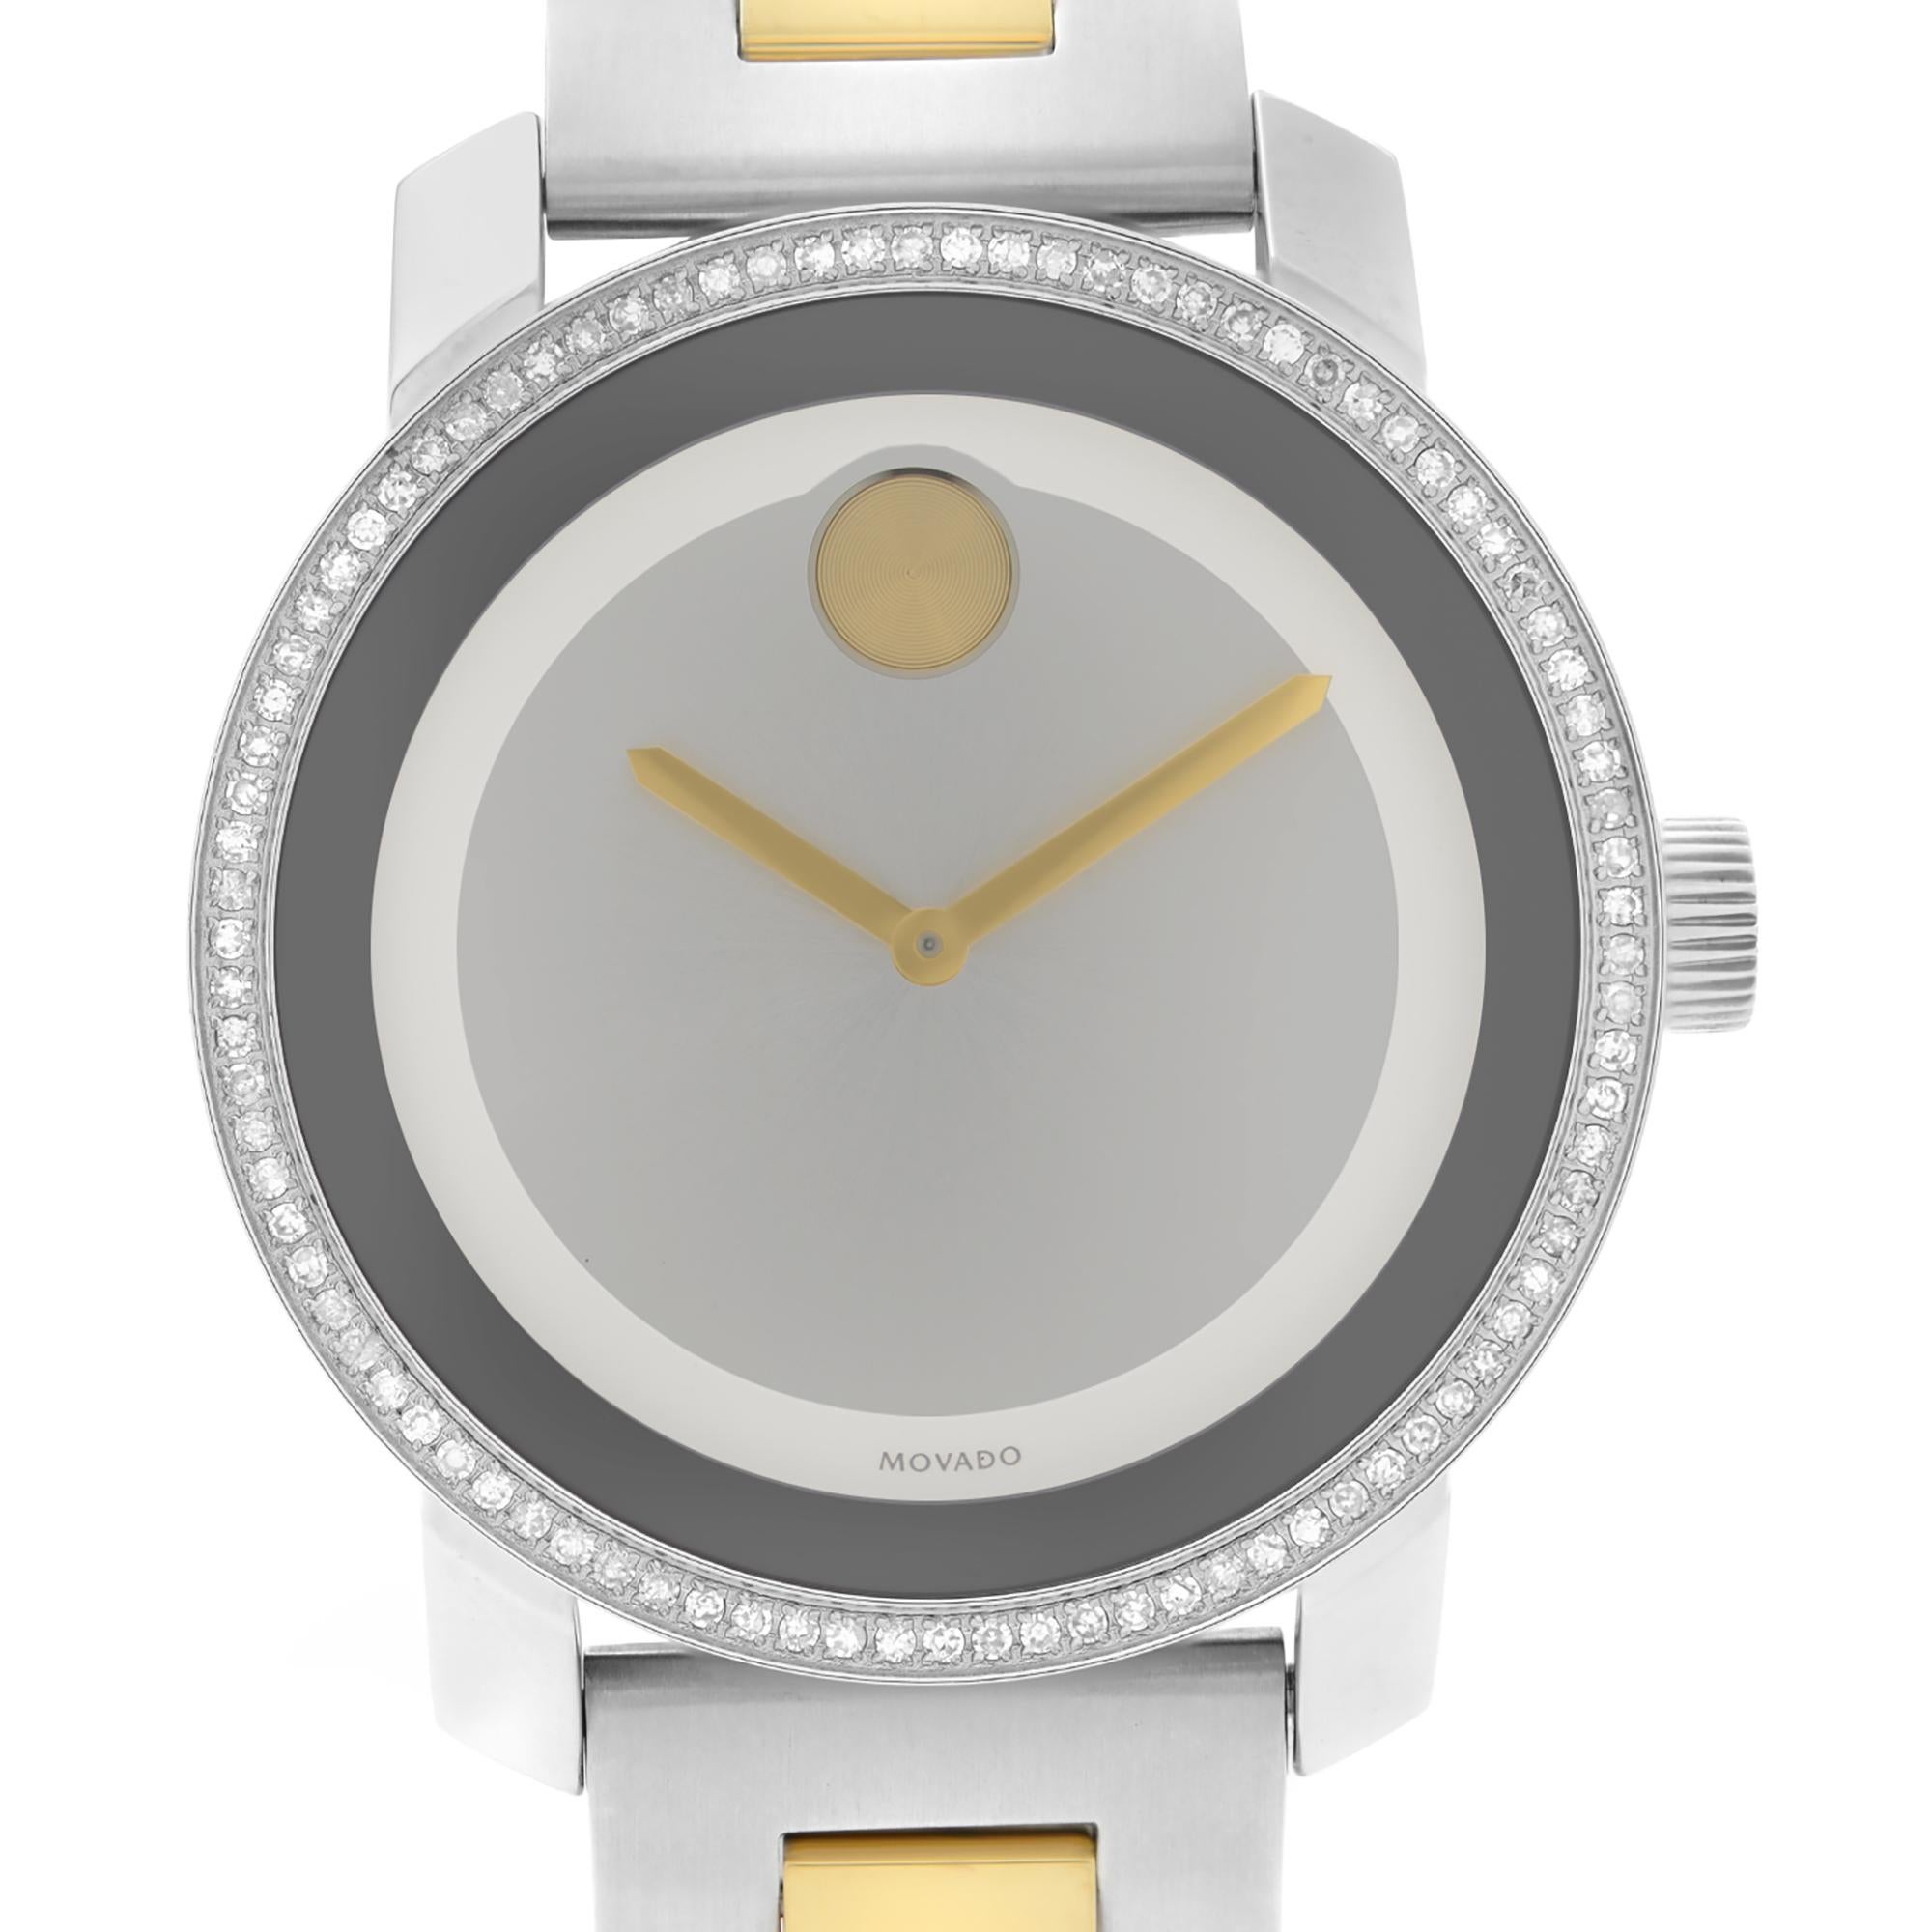 New With Defects Movado Bold 36mm Two-Tone Steel Diamond Silver Dial Quartz Ladies Watch 3600451. Timepiece Has Micro Scratches on Gold Tone Links. This Beautiful Timepiece Features: Stainless Steel Case with a Two-Tone Stainless Steel Bracelet,